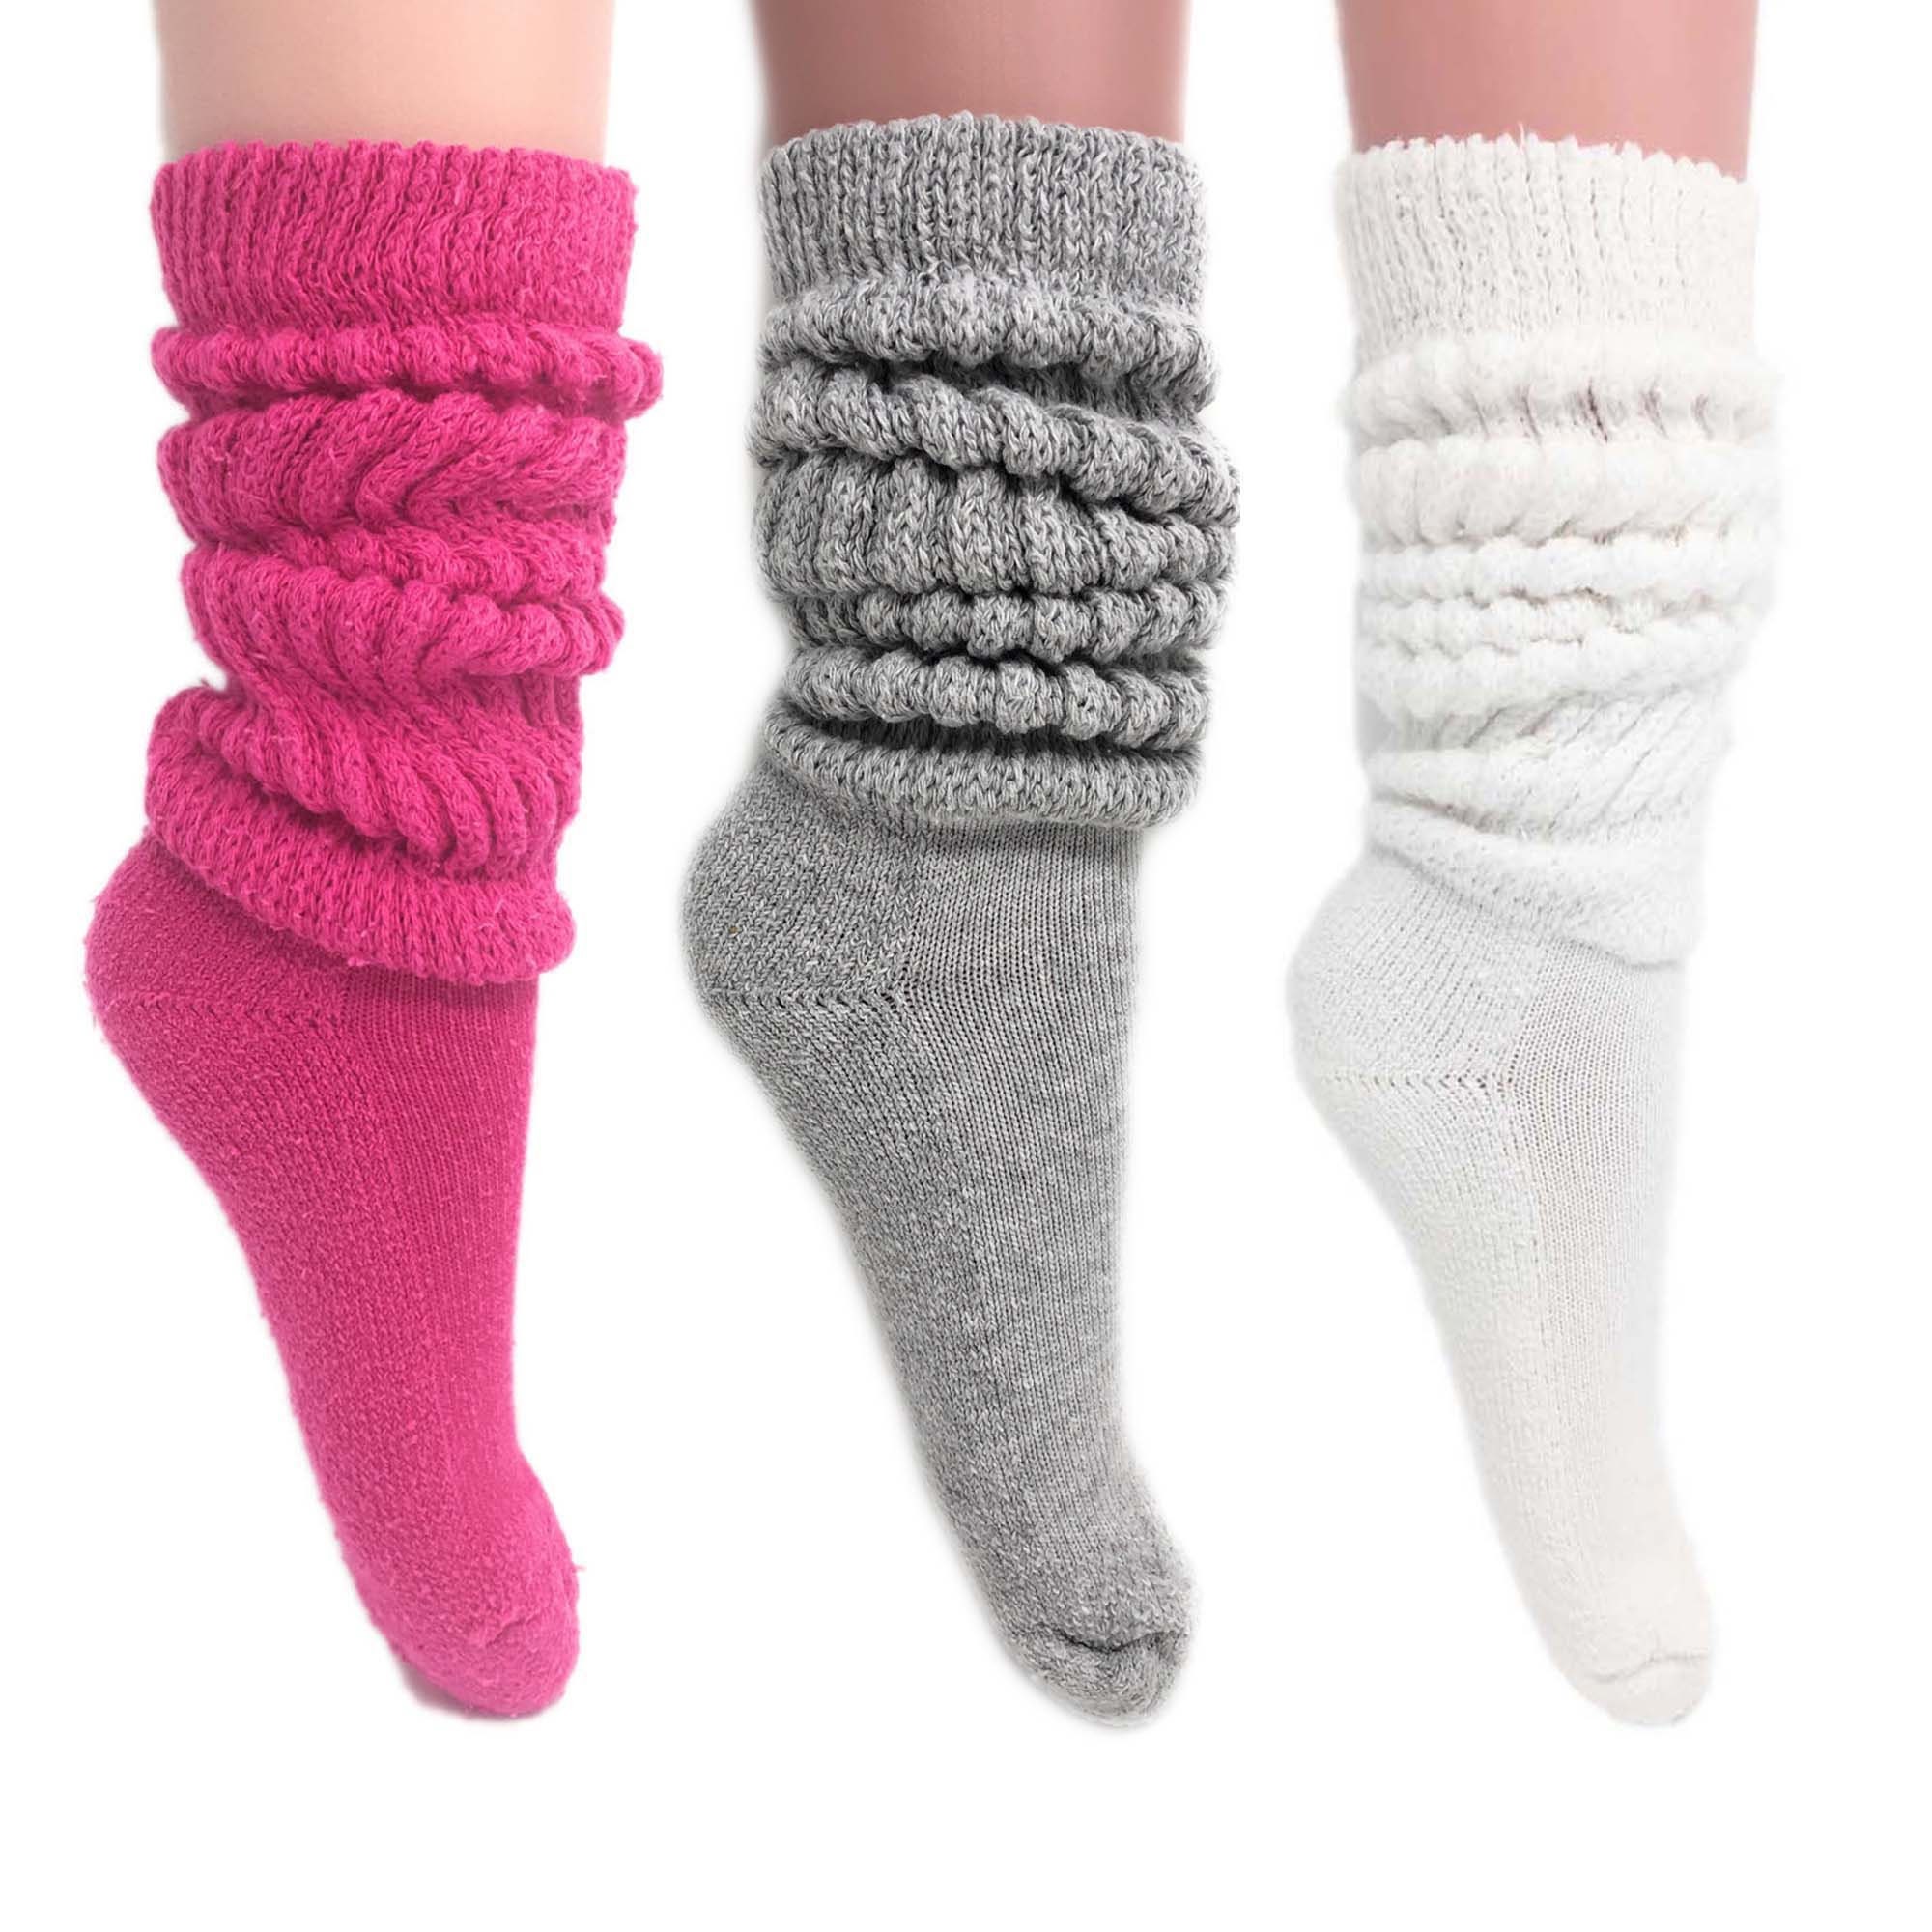 Clothing Witwot Pairs Women S Slouch Socks Cotton Knit Knee High